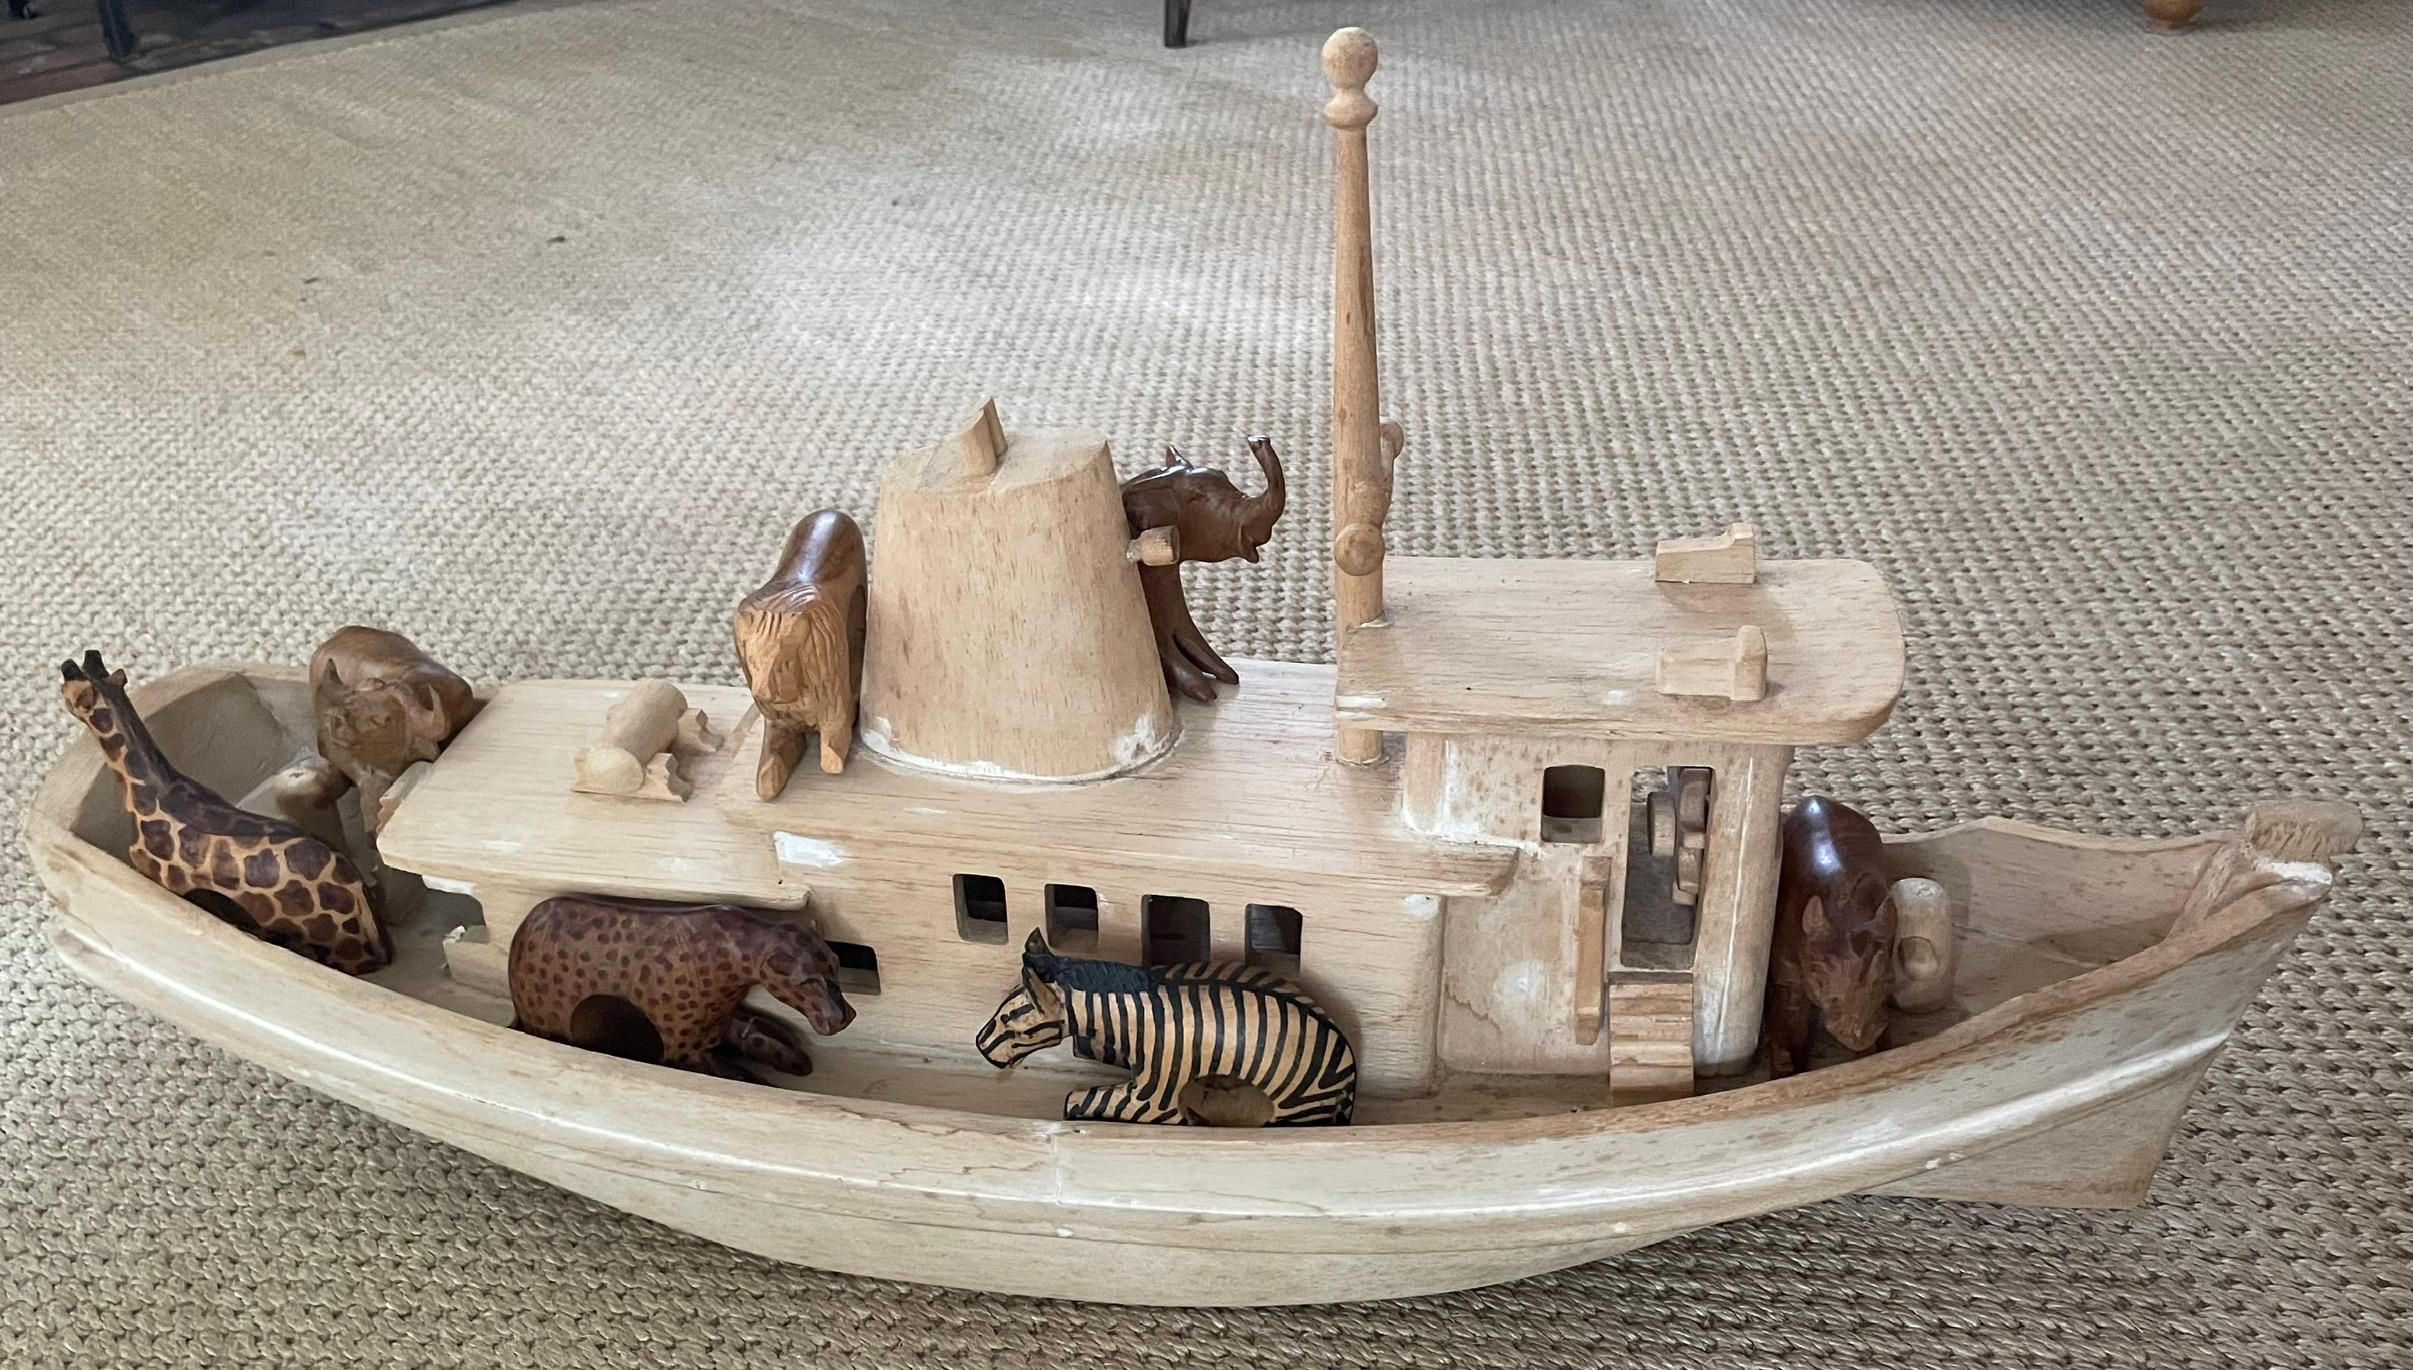 Large wooden tugboat. Hand carved wooden tugboat. United States, Mid-20th Century. 
Dimensions: 28” W x 8.5” D x 15” to tip of mast

*Set of 12 African Safari toys/napkin rings available at separate listing Ref: LU1084234574282